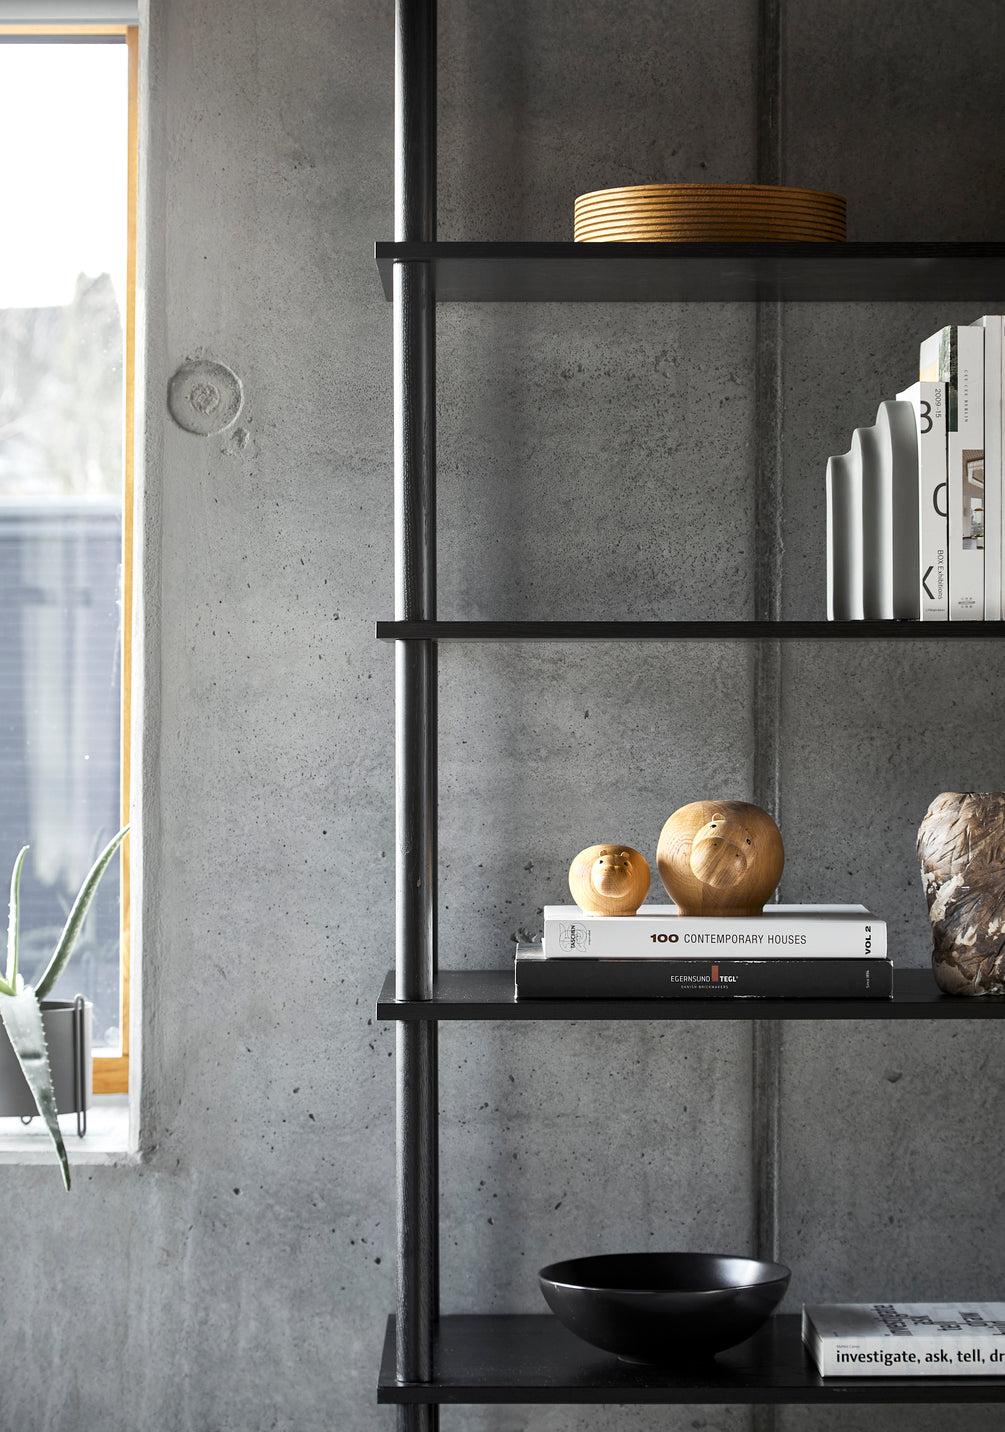 elevate shelving - system 6 by woud at adorn.house